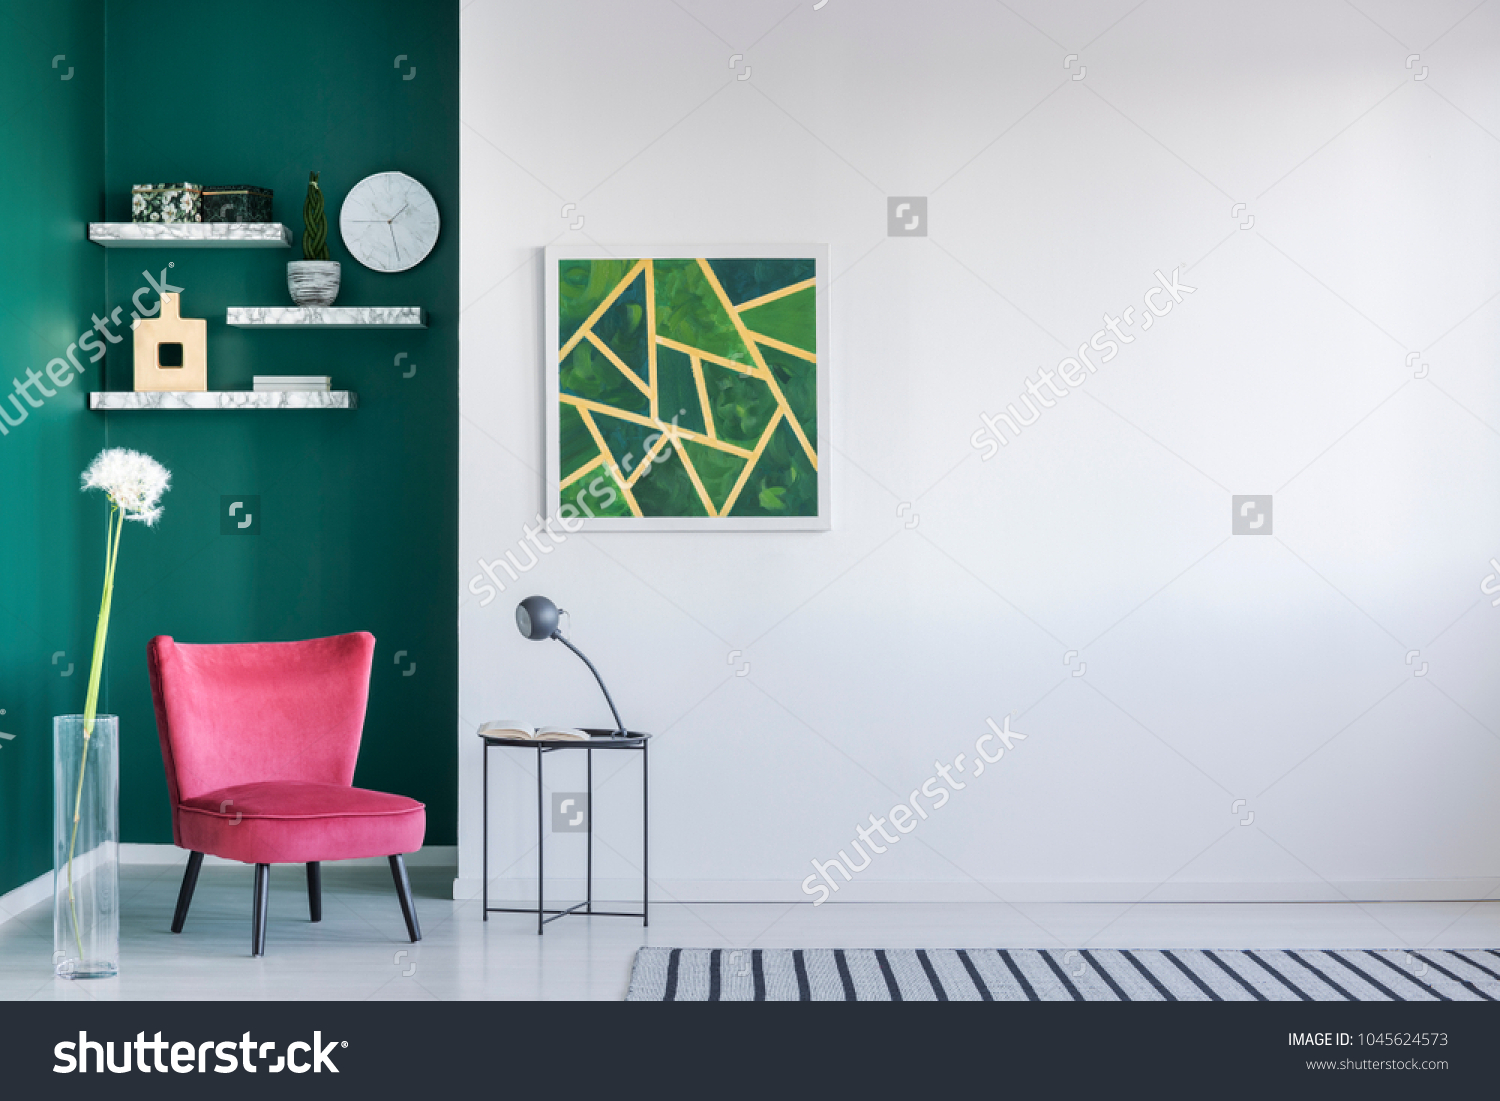 Green wall in a living room interior with pink armchair, painting, coffee table and striped rug #1045624573